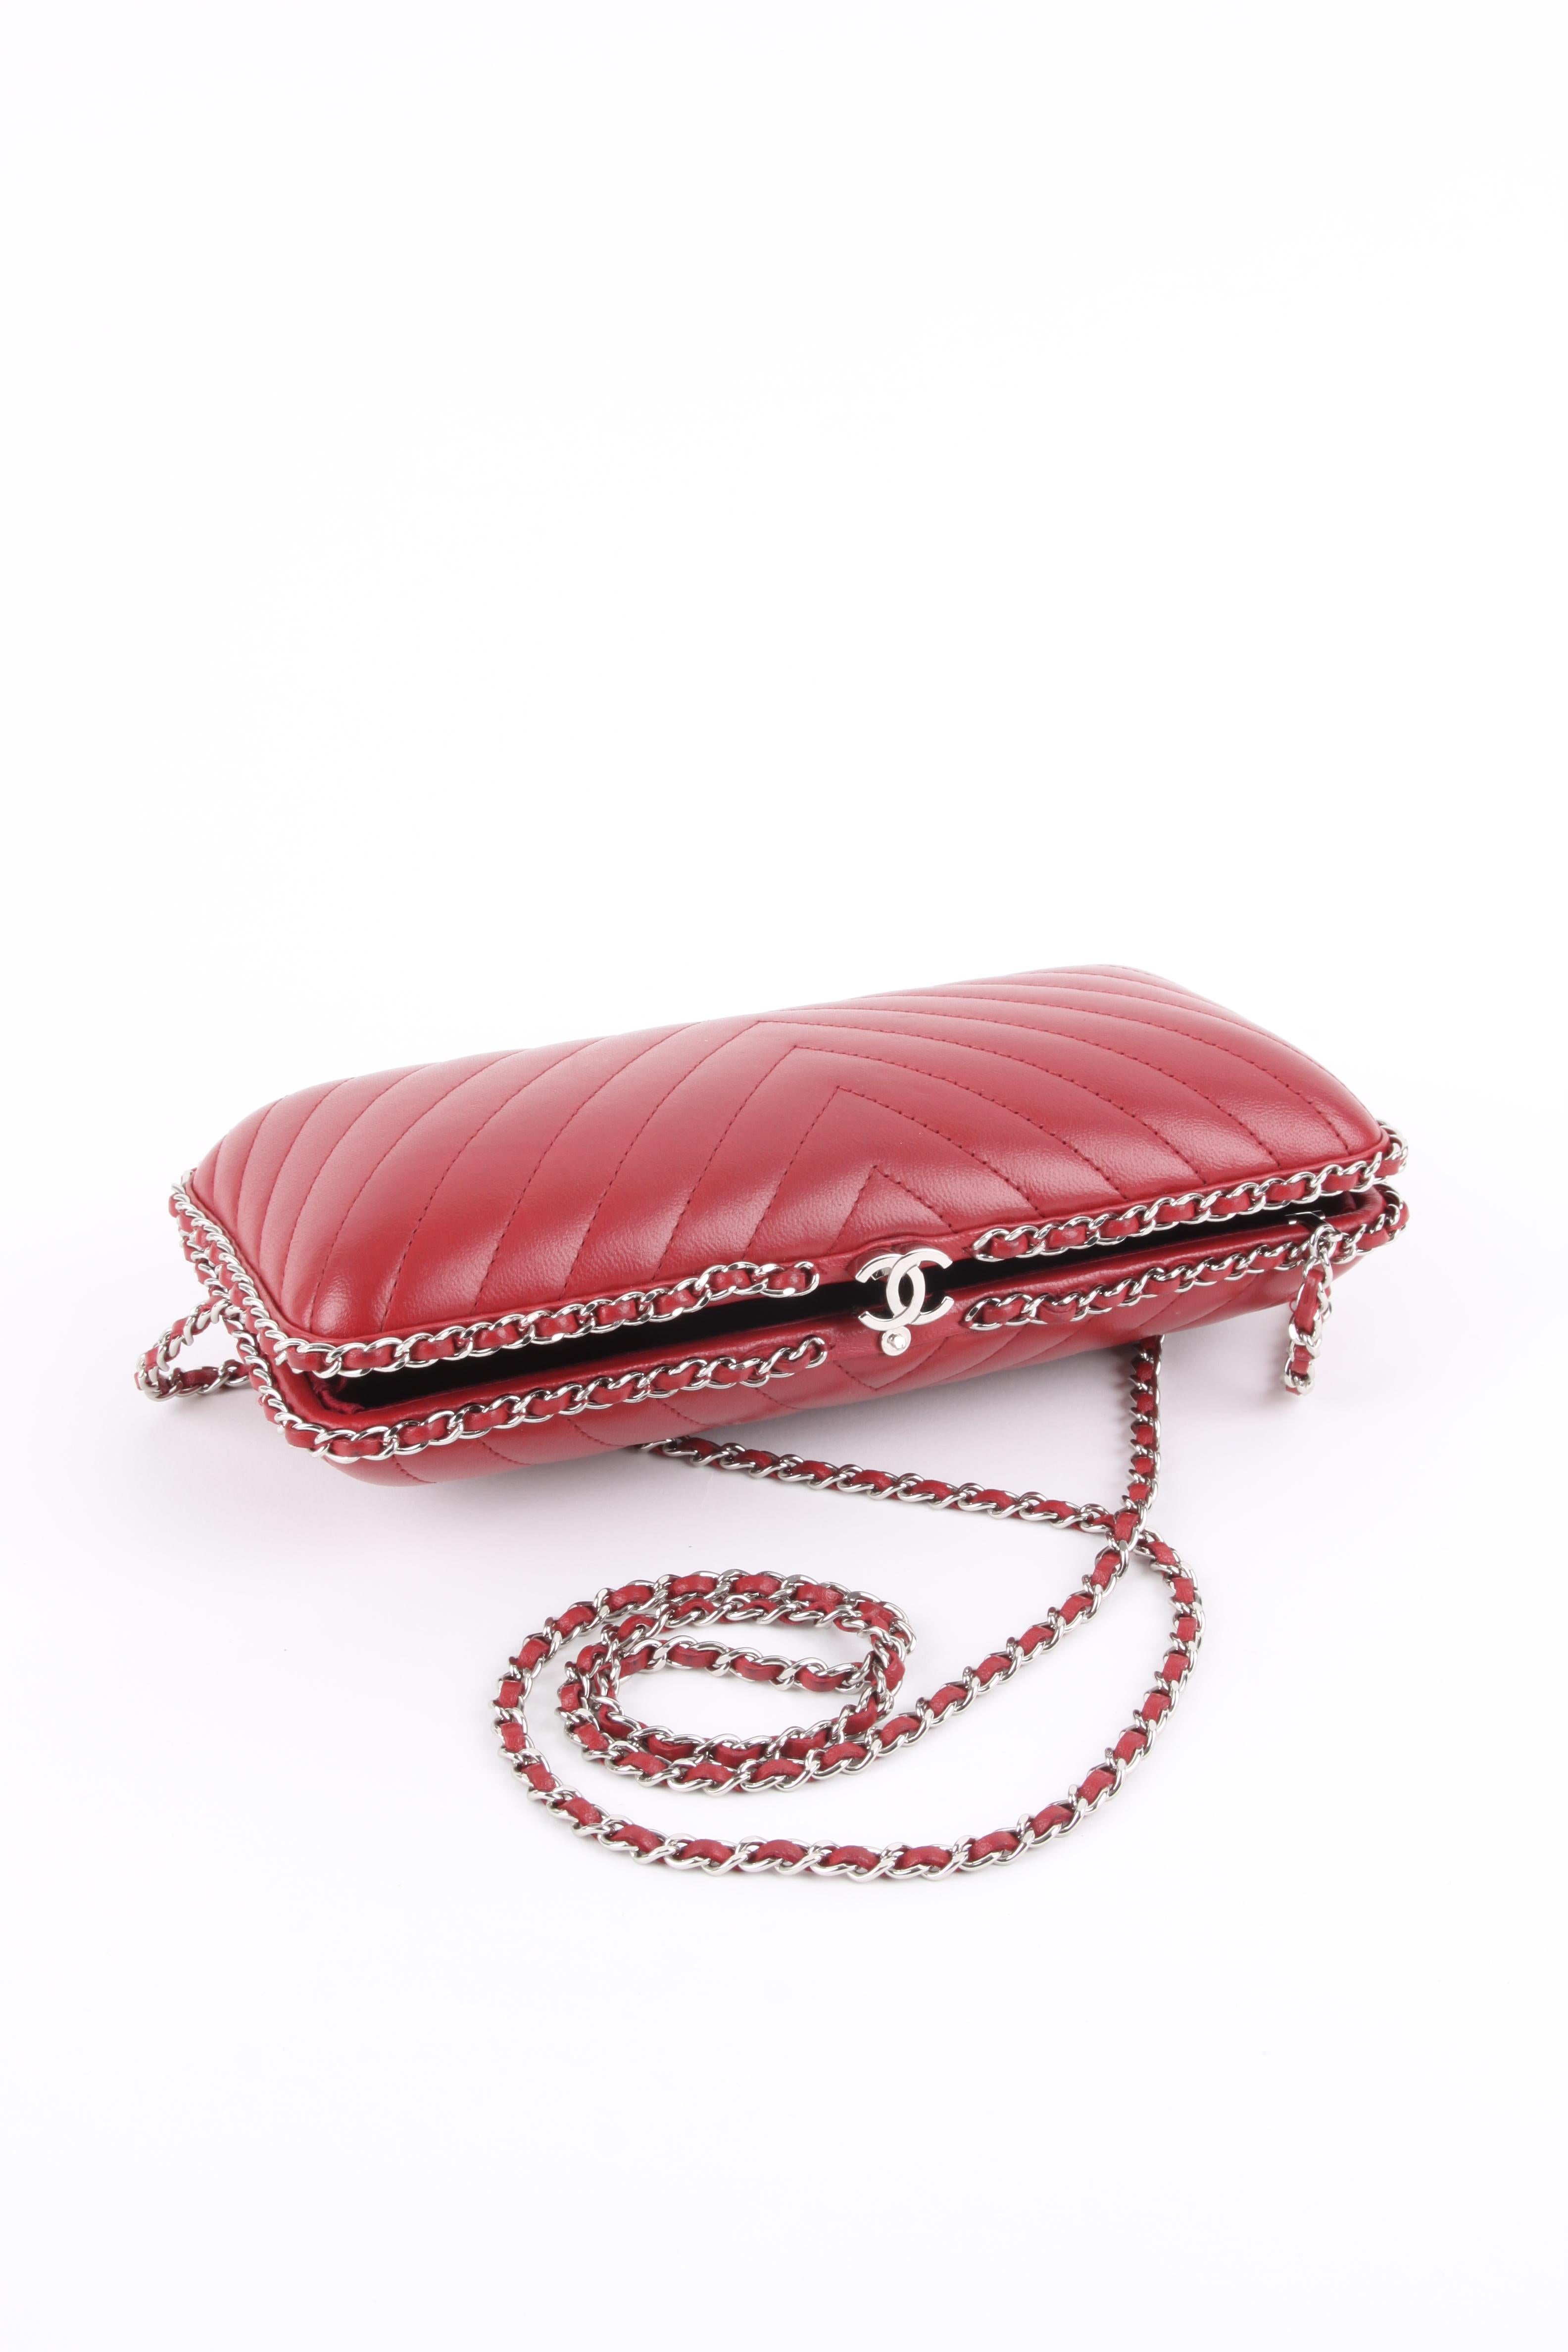 Wonderful evening bag by Chanel, this is the Chain Around Box Clutch.

Executed in warm red leather with Chevron-quilting on the front and back. Embellished with a silver-tone chain entwined with red leather. 

A CC lock on top, inside lining in